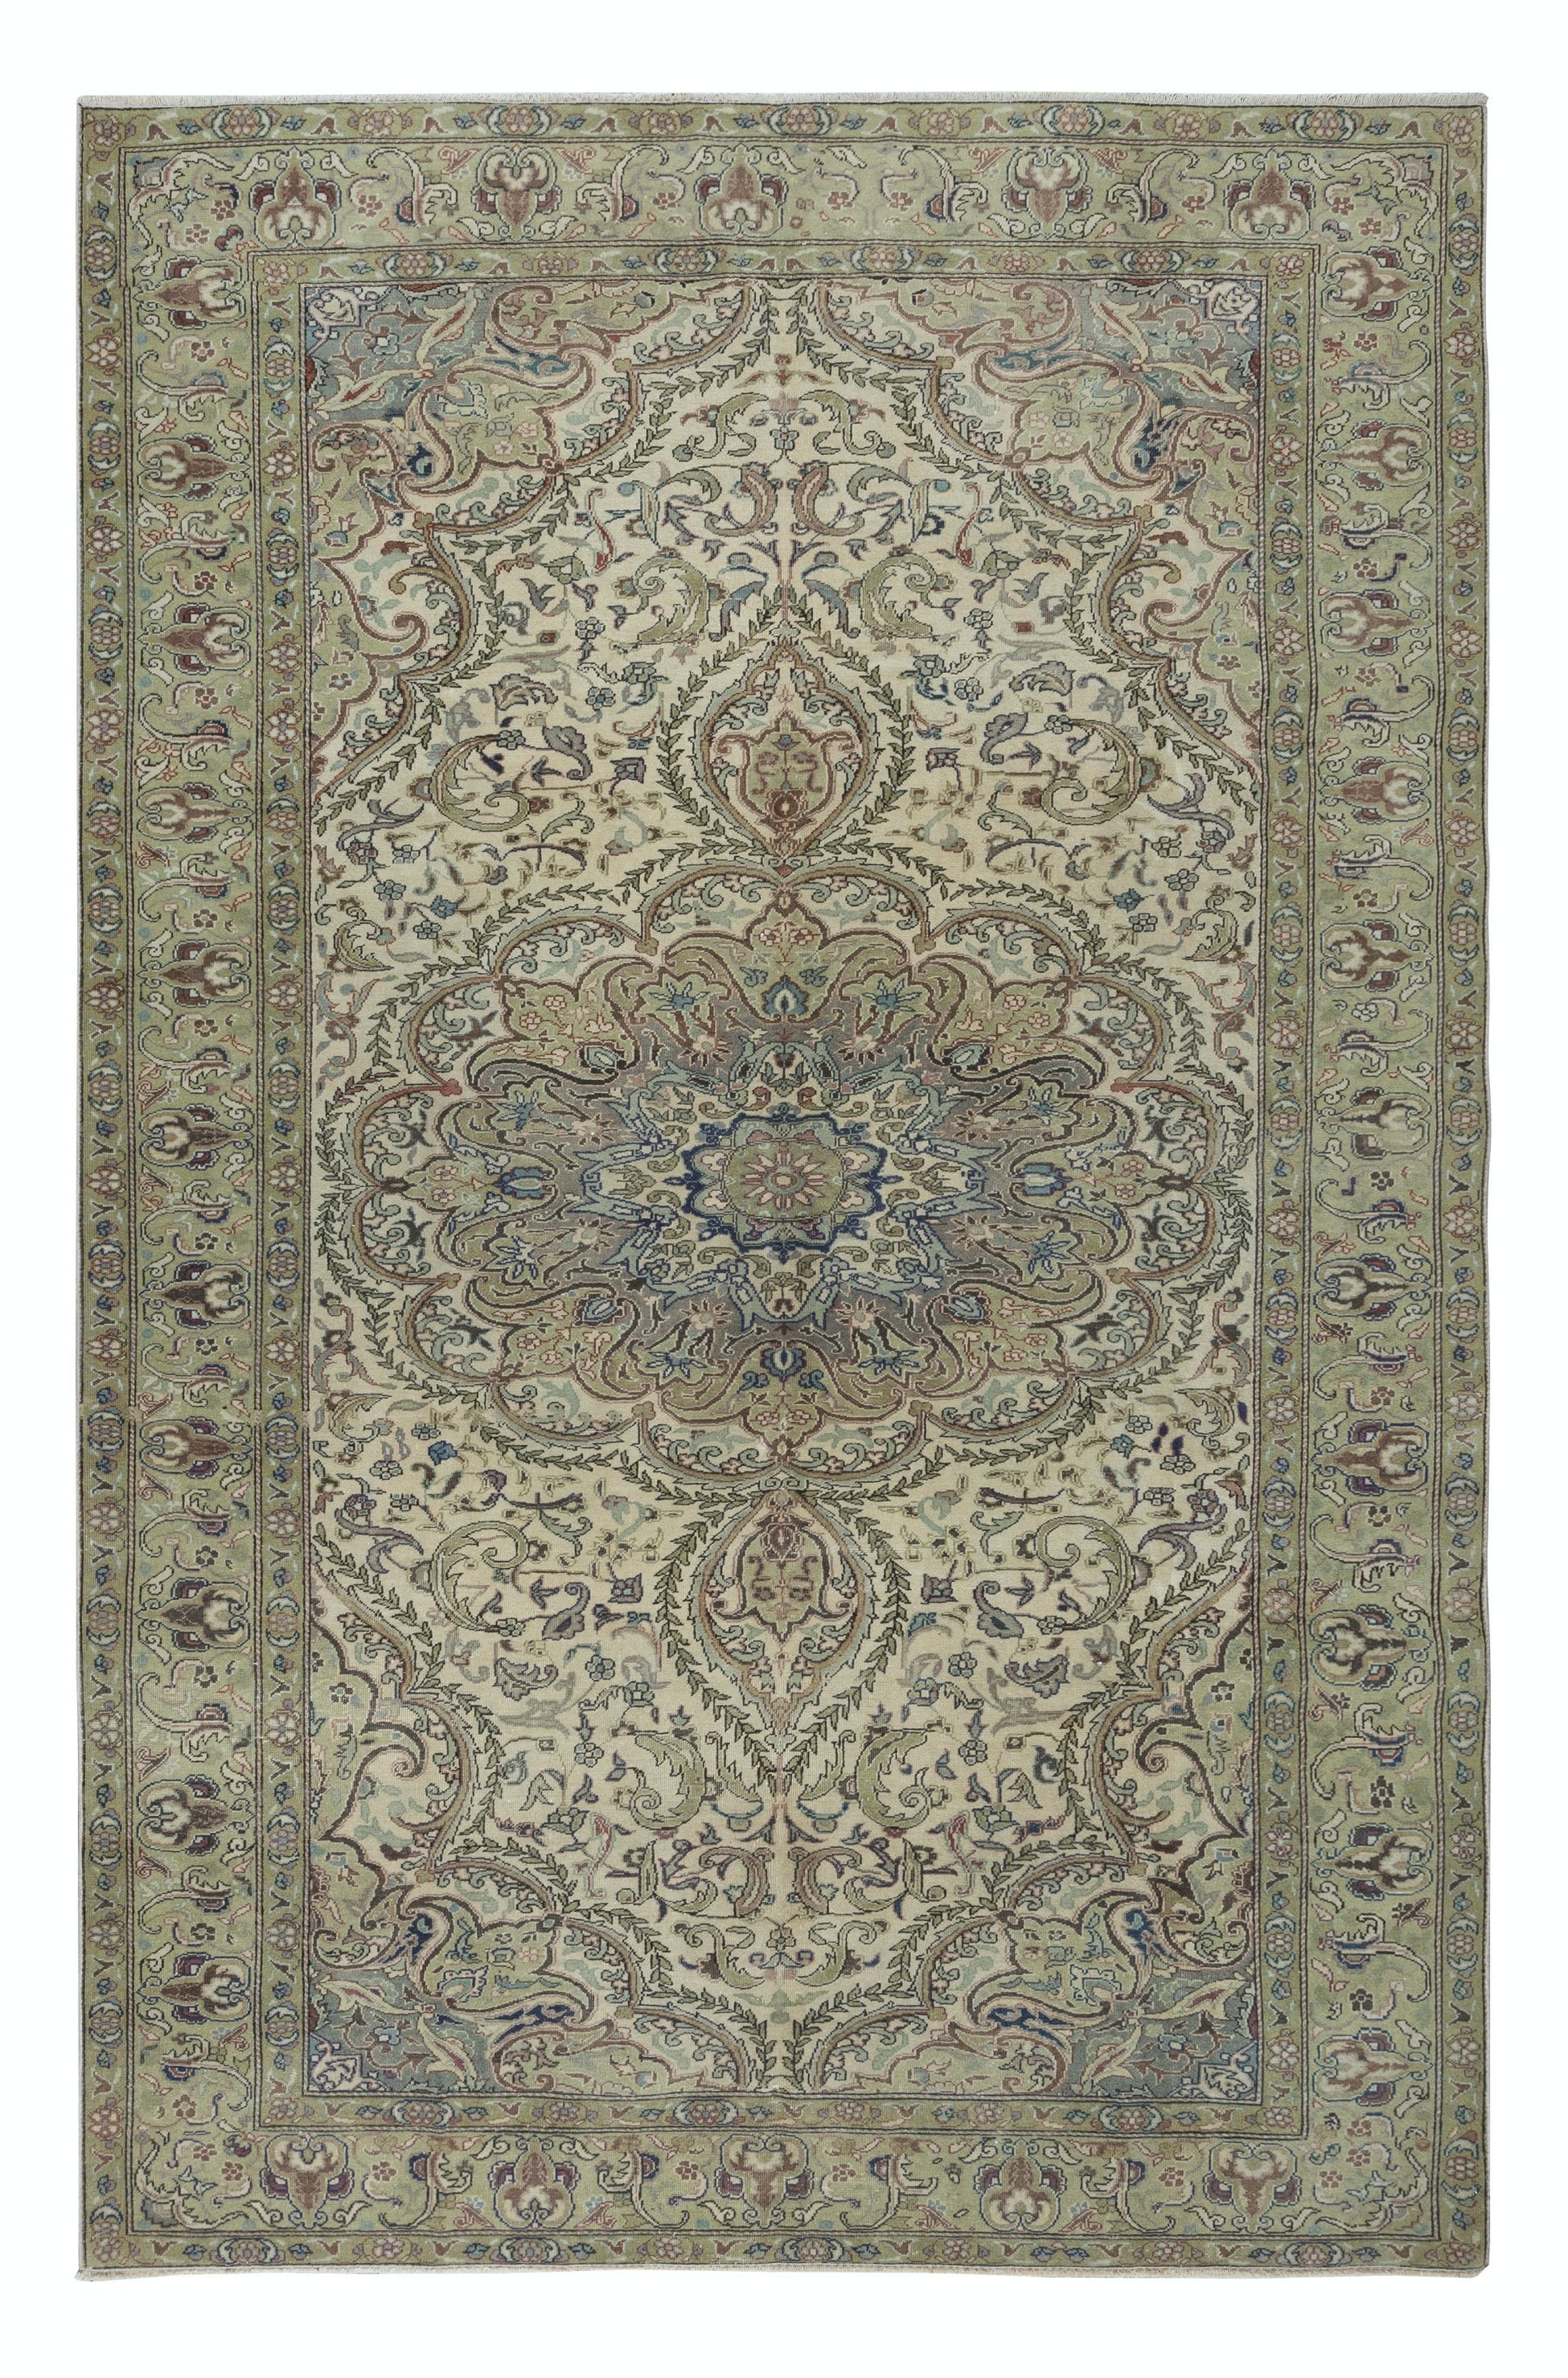 6.4x9.8 Ft Traditional Handmade Turkish Medallion Design Rug in Green Tones For Sale